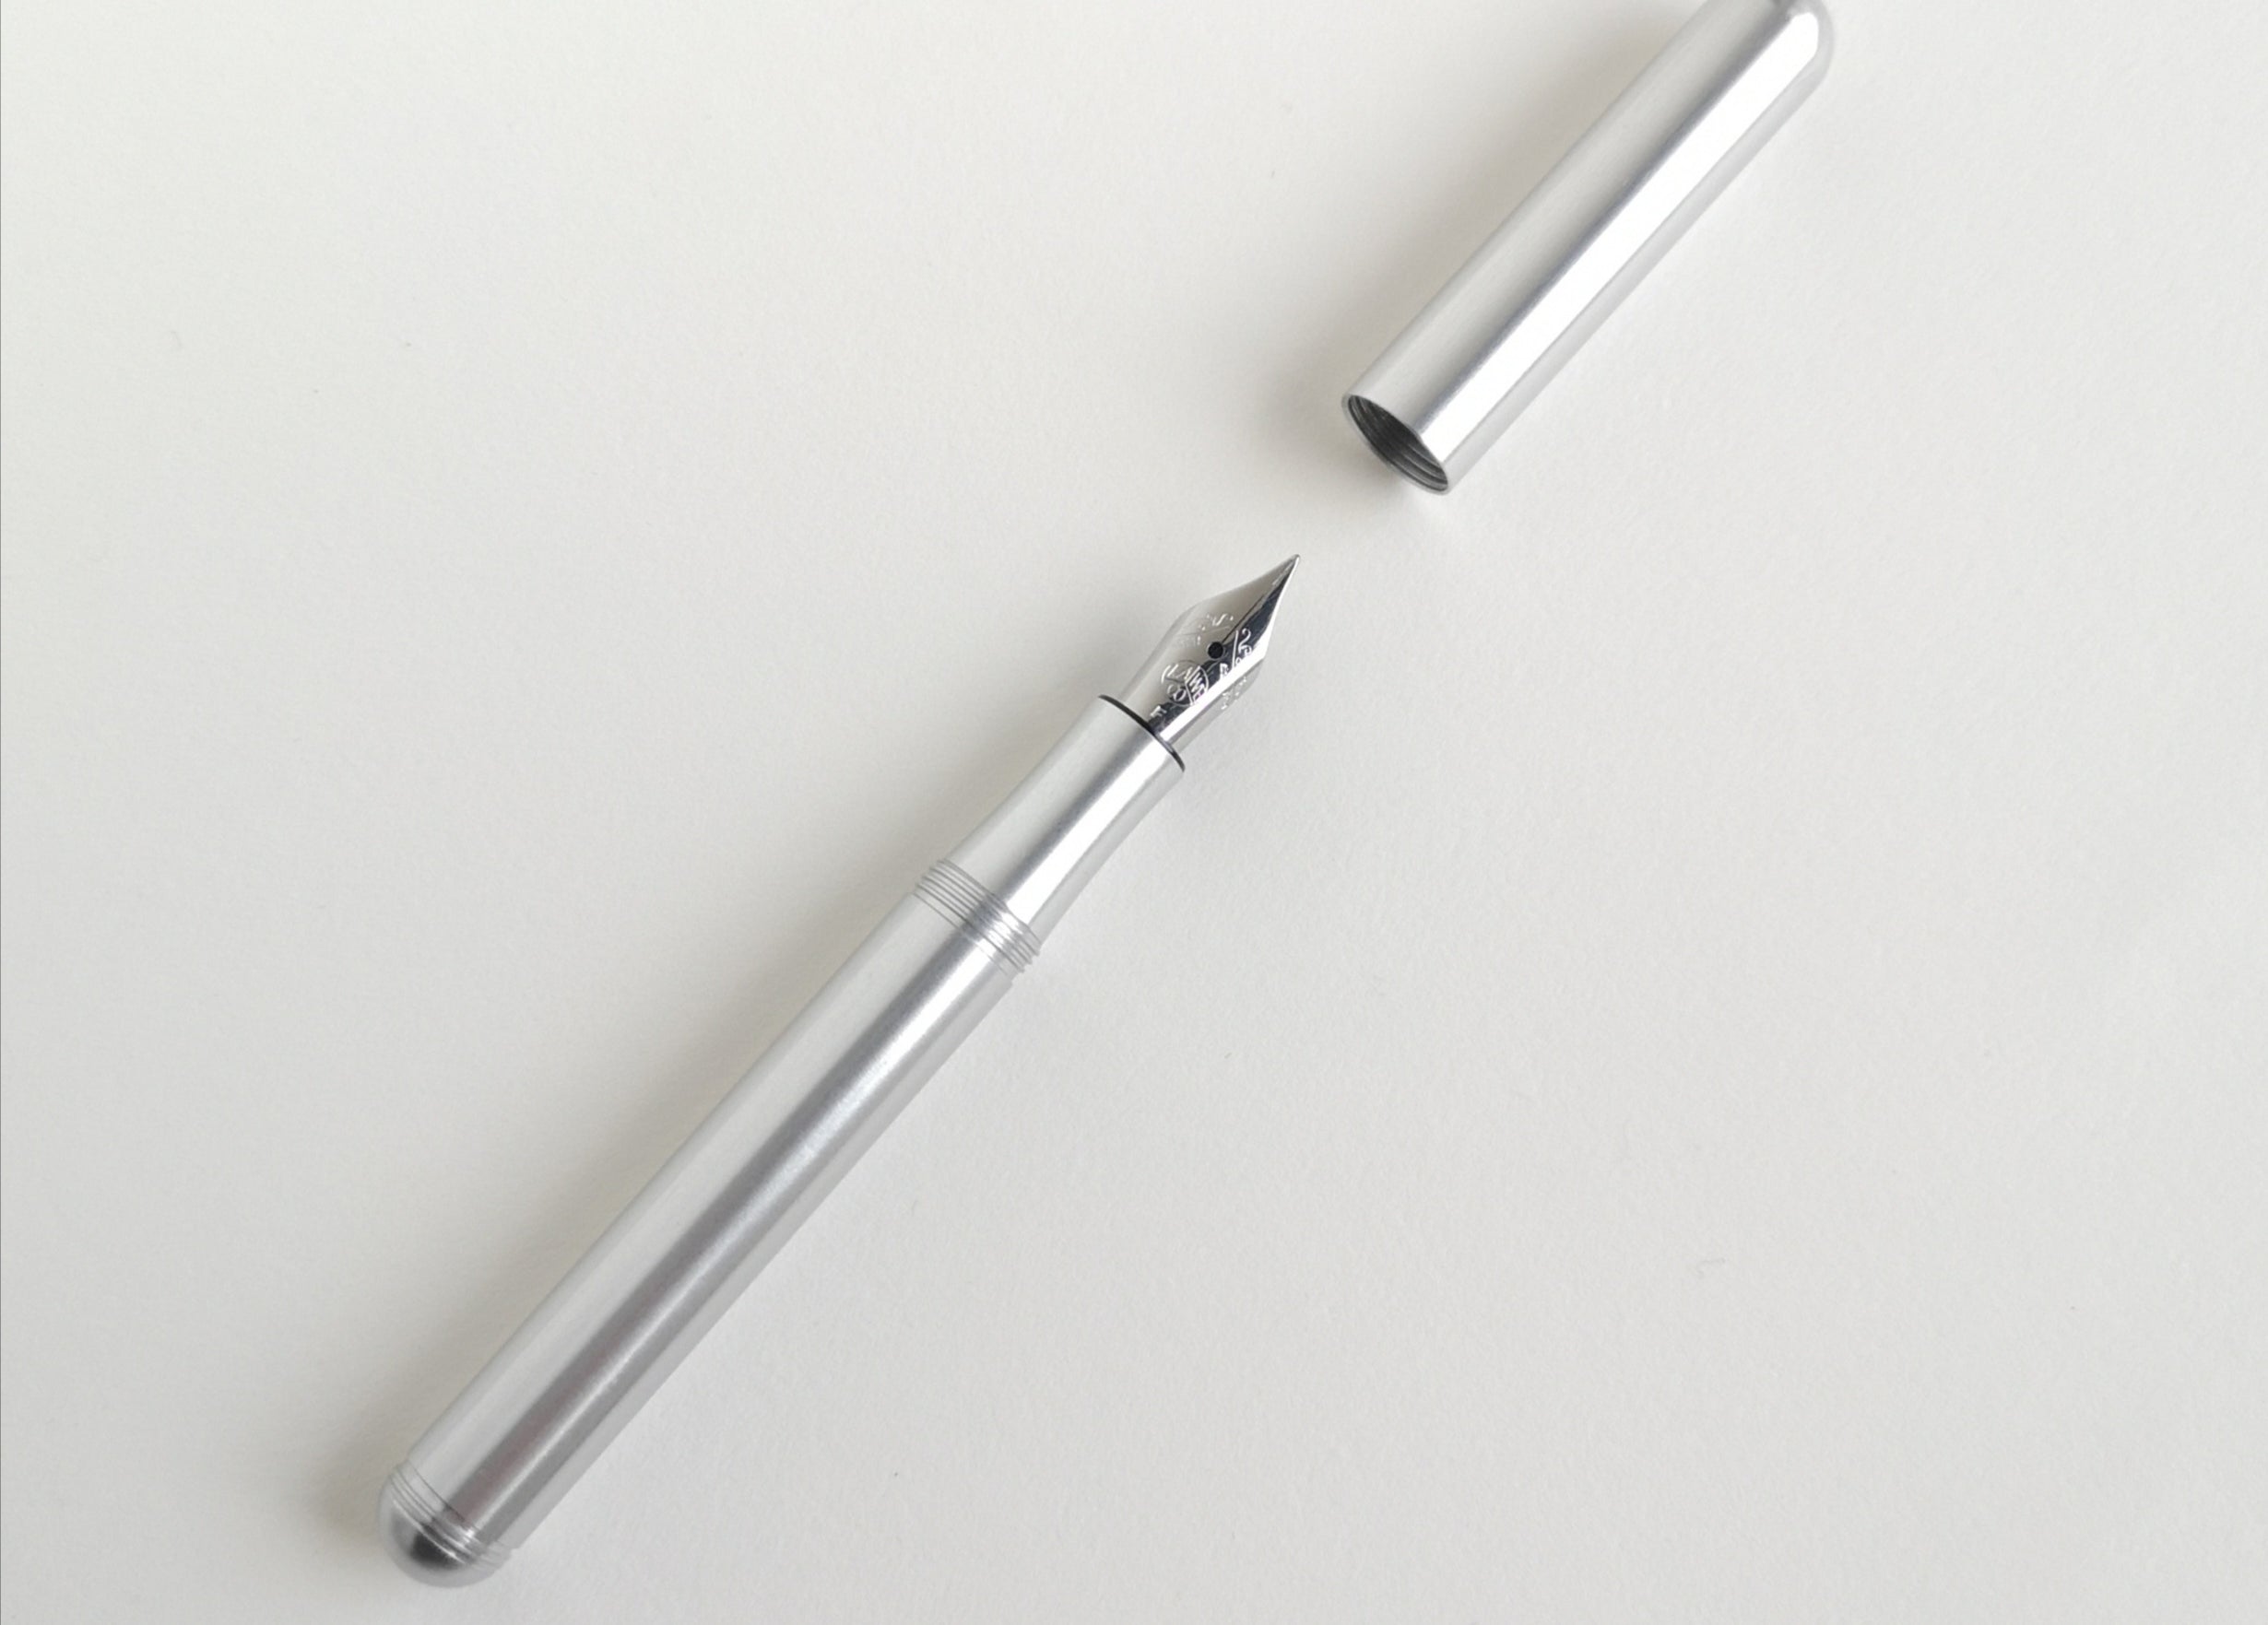 Kaweco Silver Liliput Fountain Pen with cap off